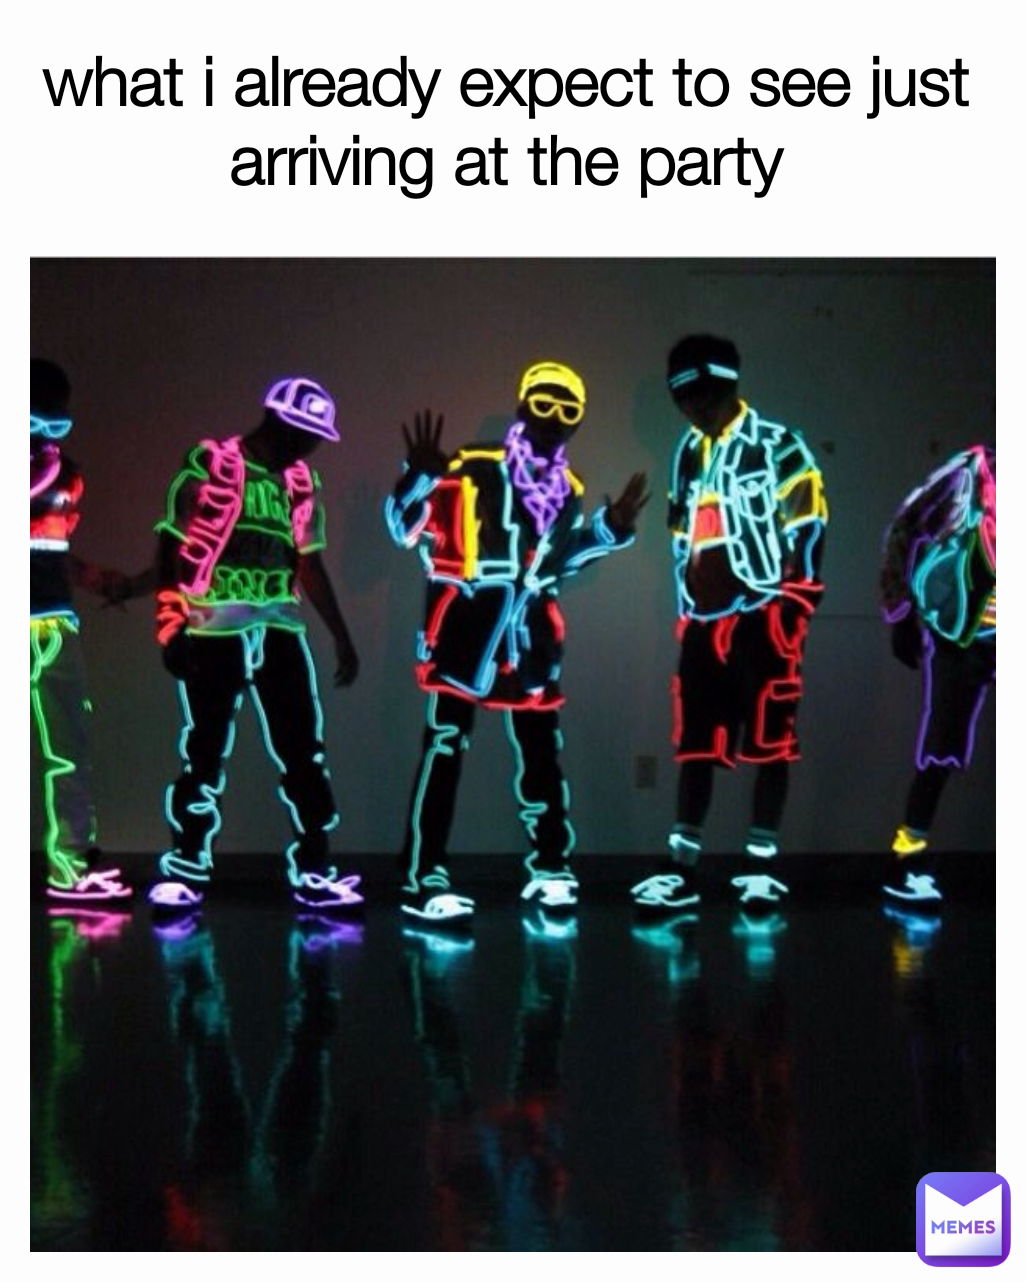 what i already expect to see just arriving at the party